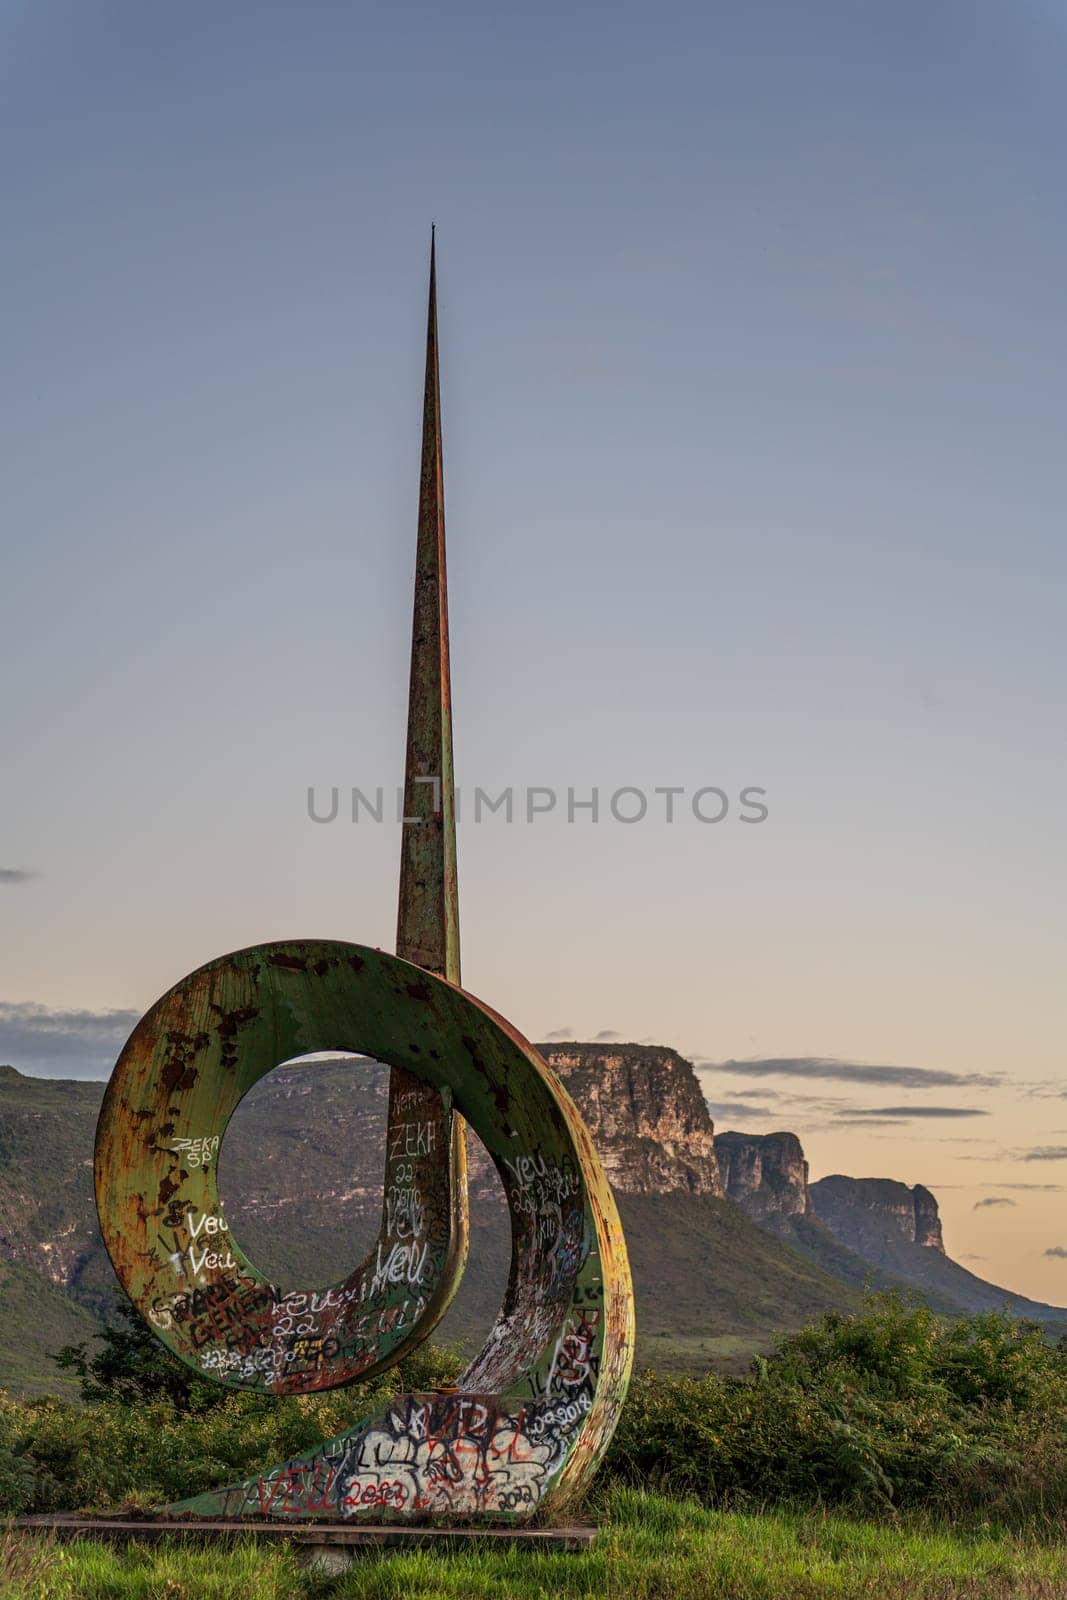 Abstract Sculpture with Graffiti Against a Mountainous Skyline by FerradalFCG